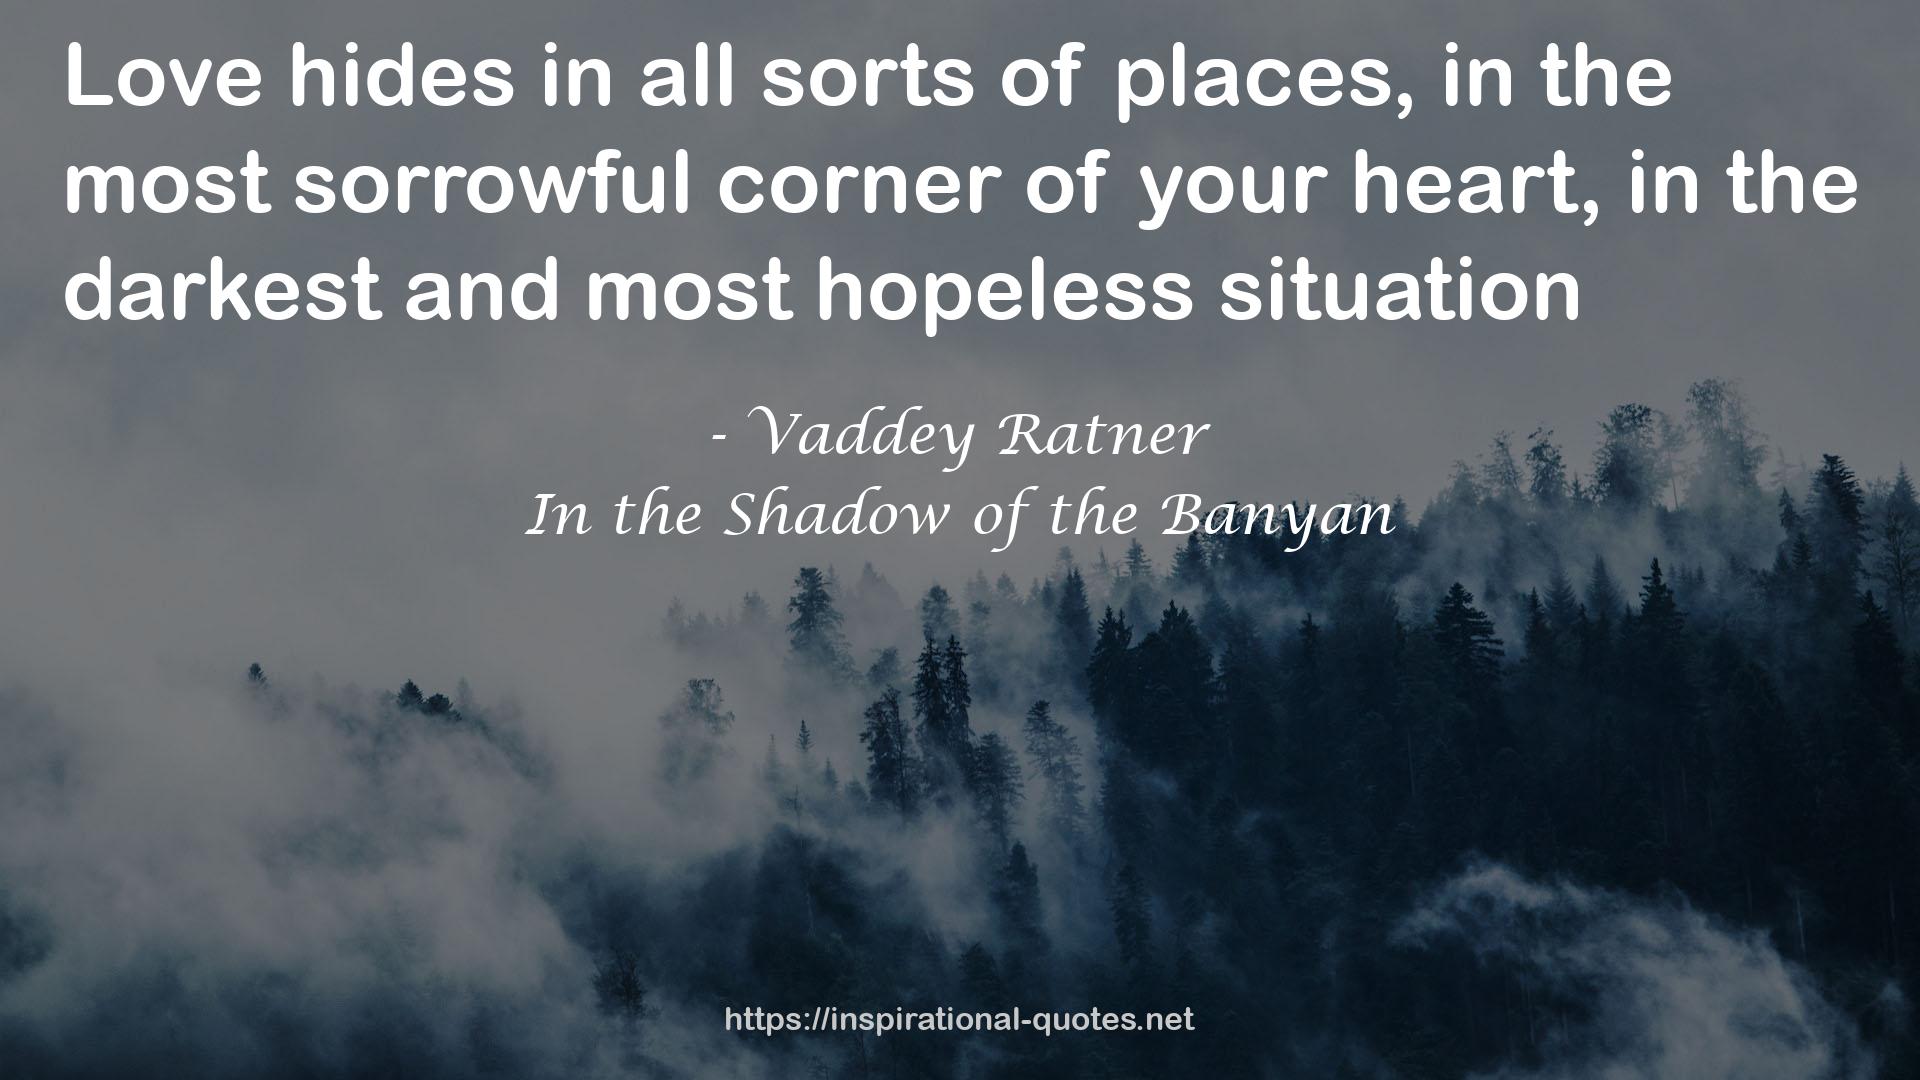 Vaddey Ratner QUOTES